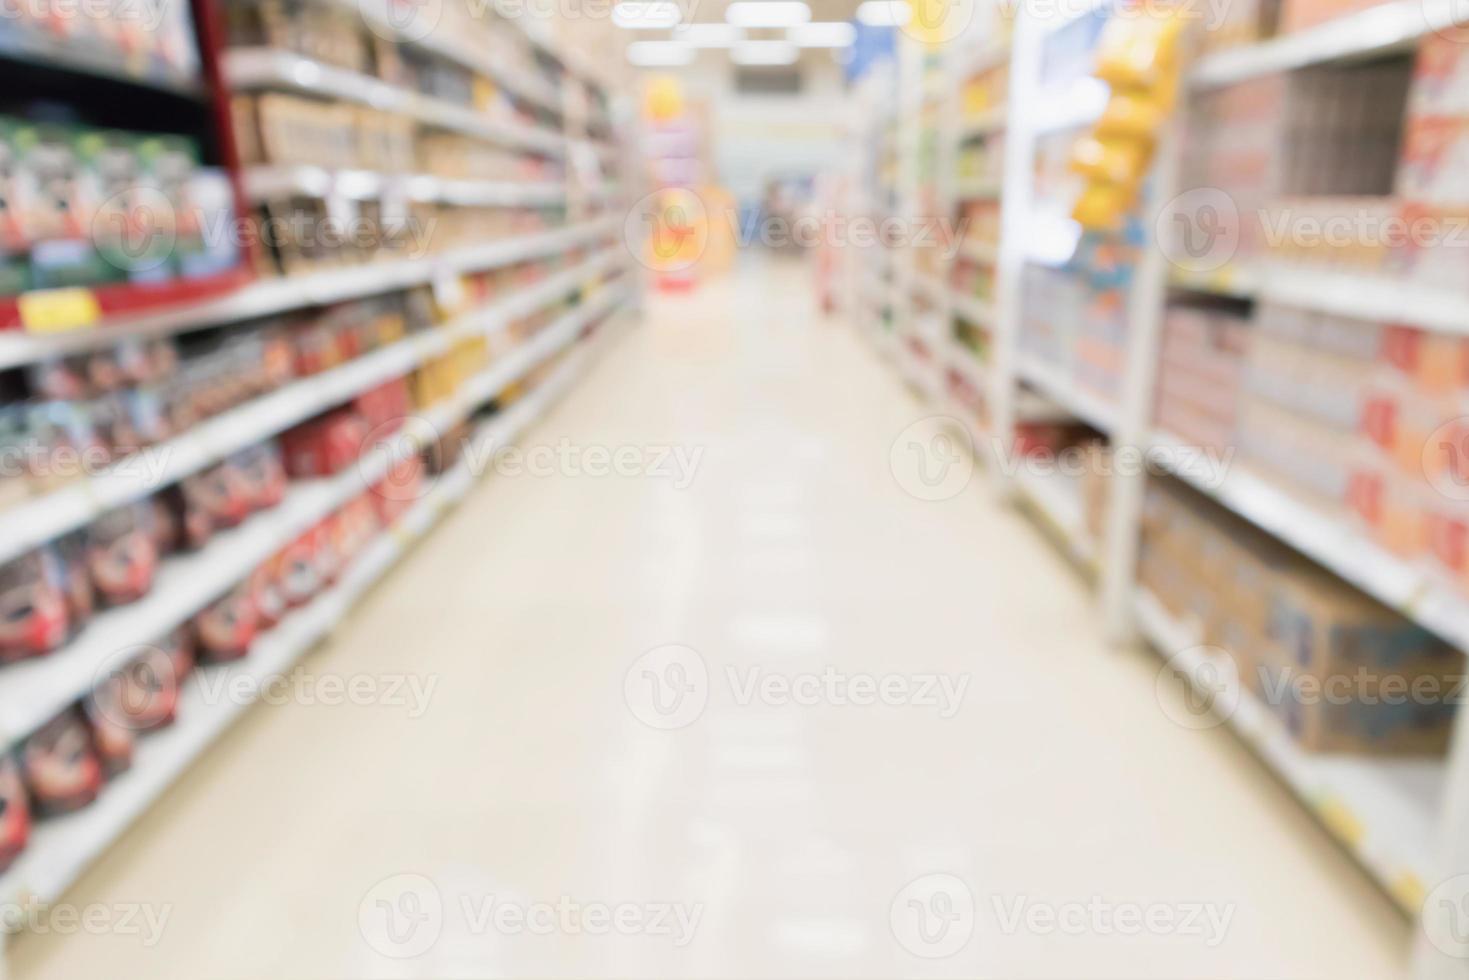 Abstract blur supermarket discount store aisle and product shelves interior defocused background photo